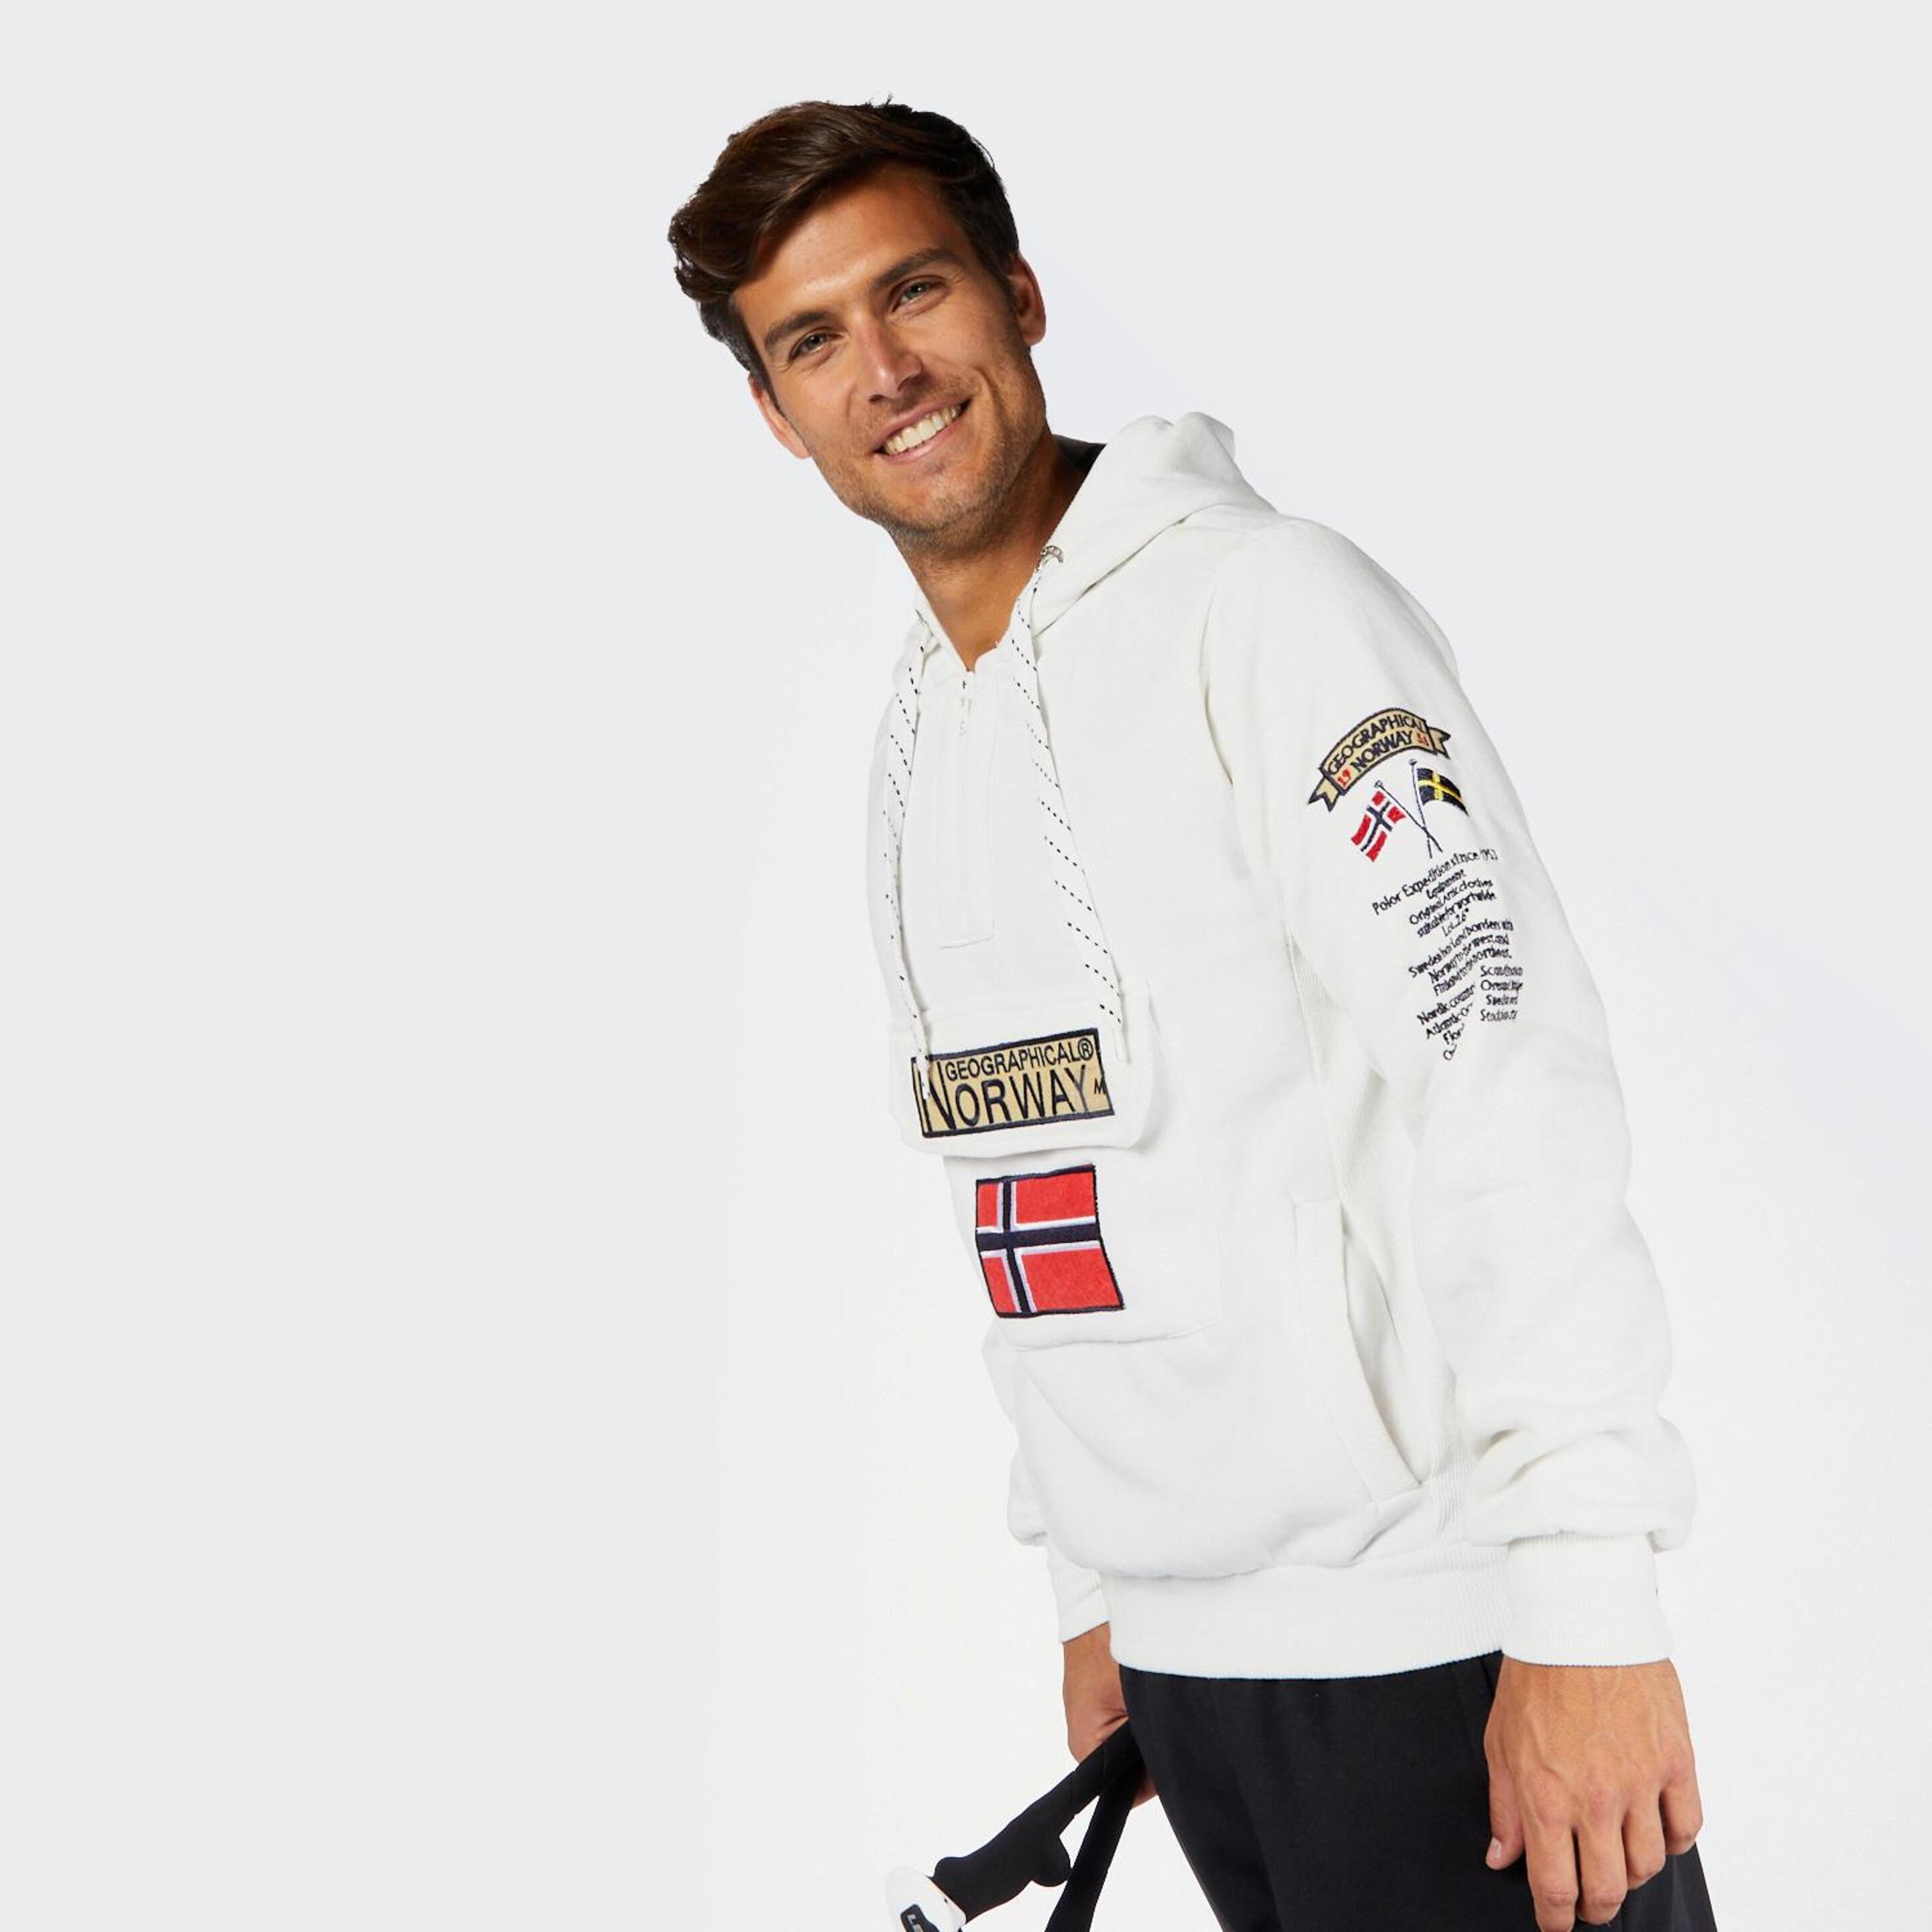 Geographical Norway Gymclass